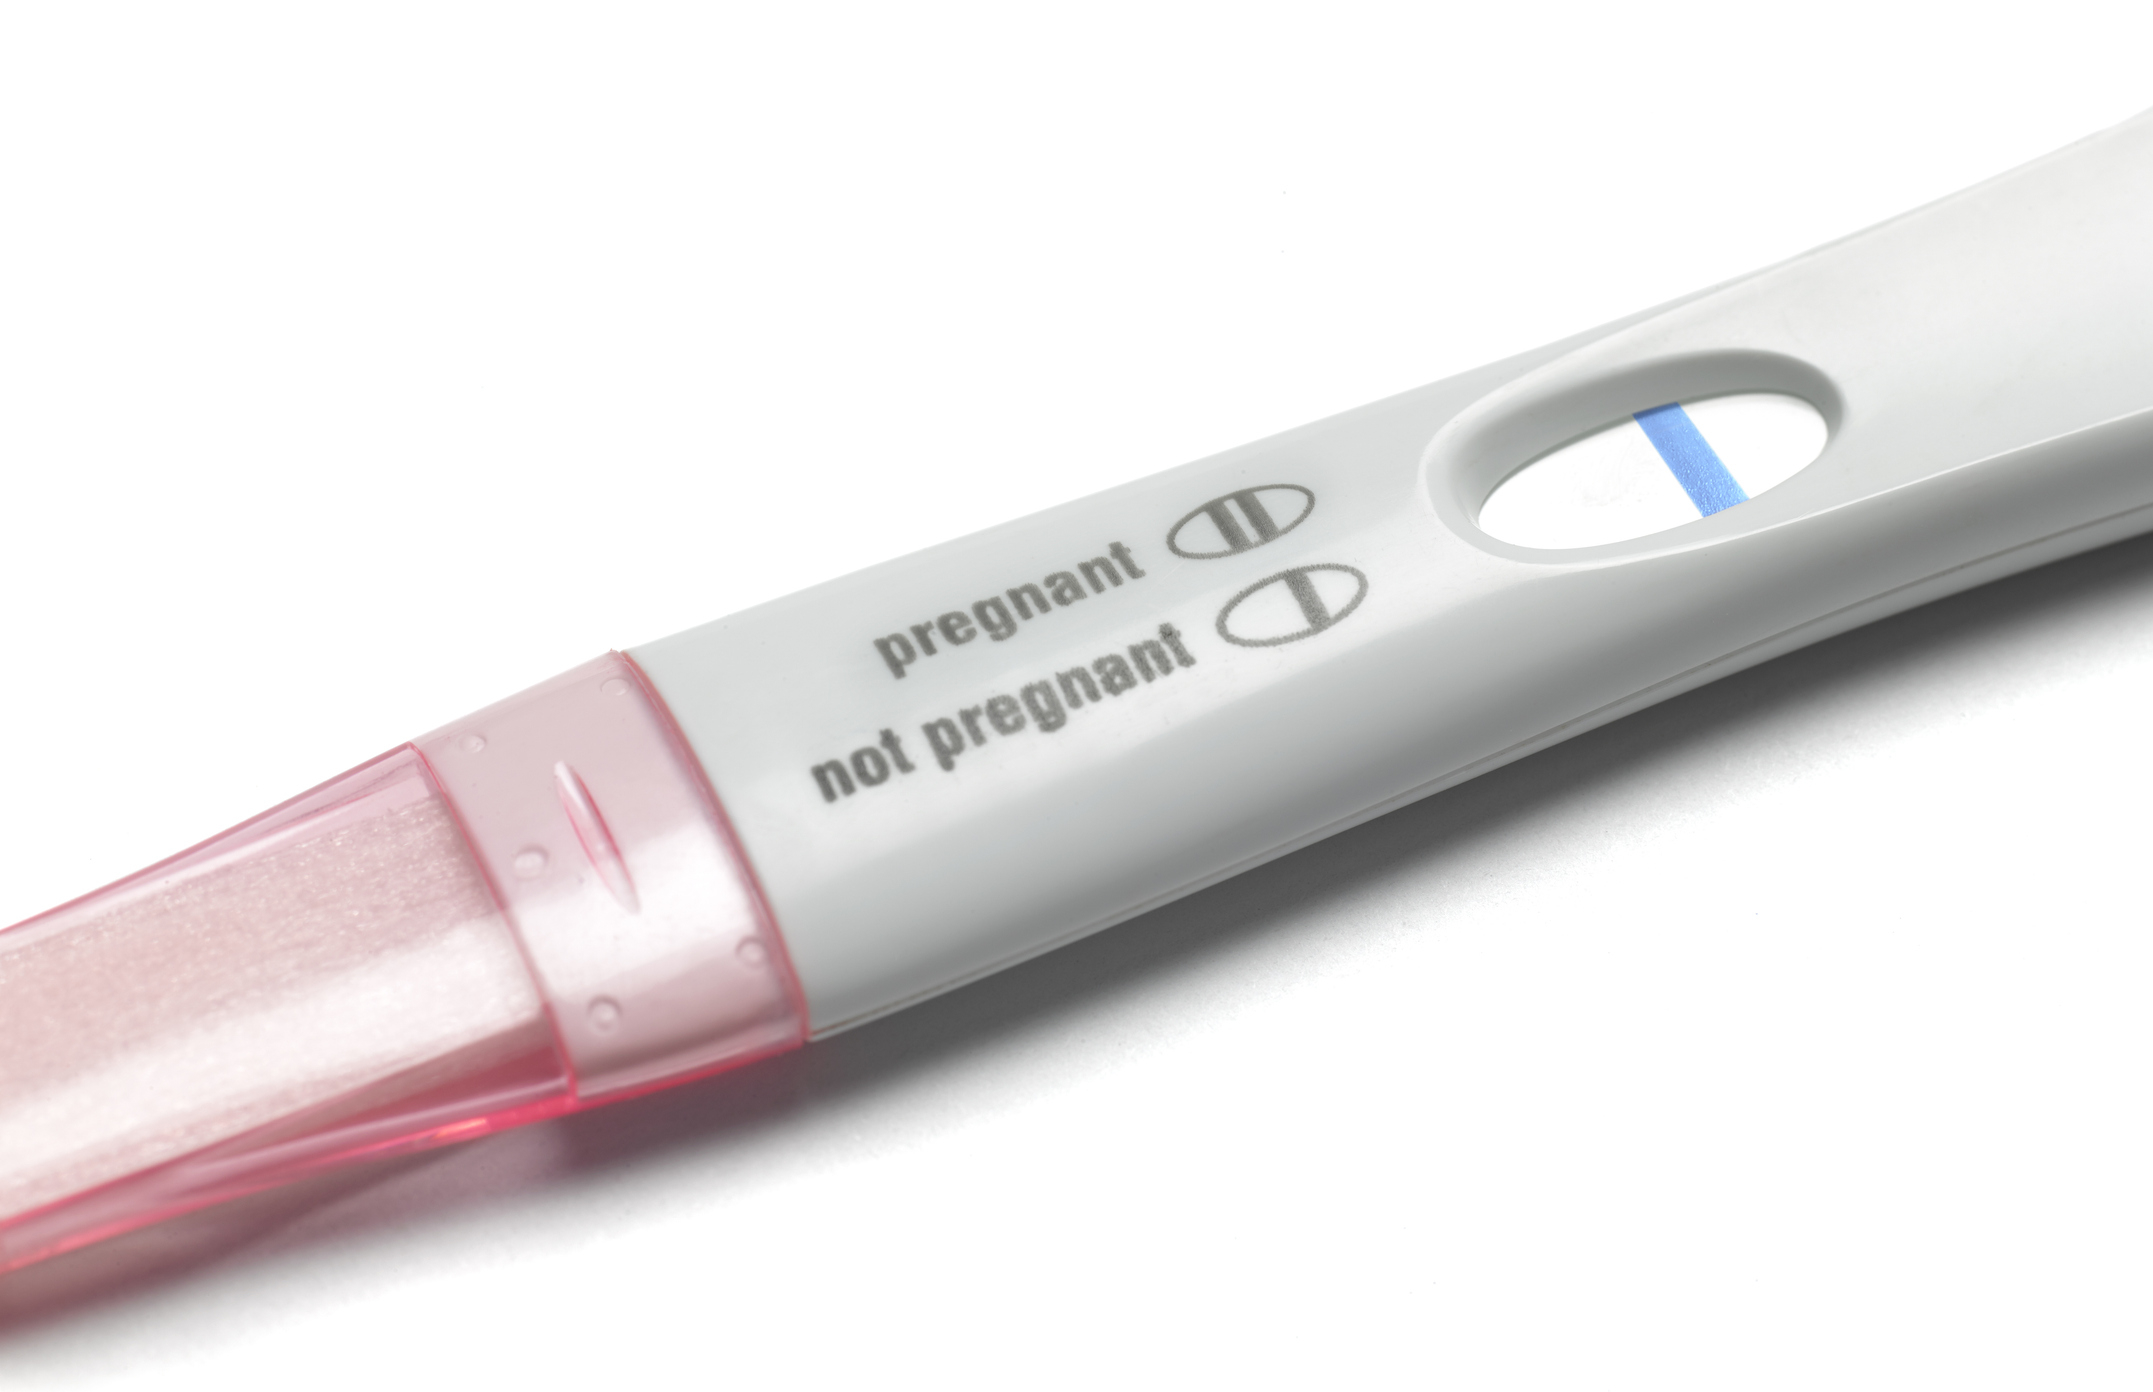 Pregnancy test showing a positive result with one blue line next to &#x27;pregnant&#x27;